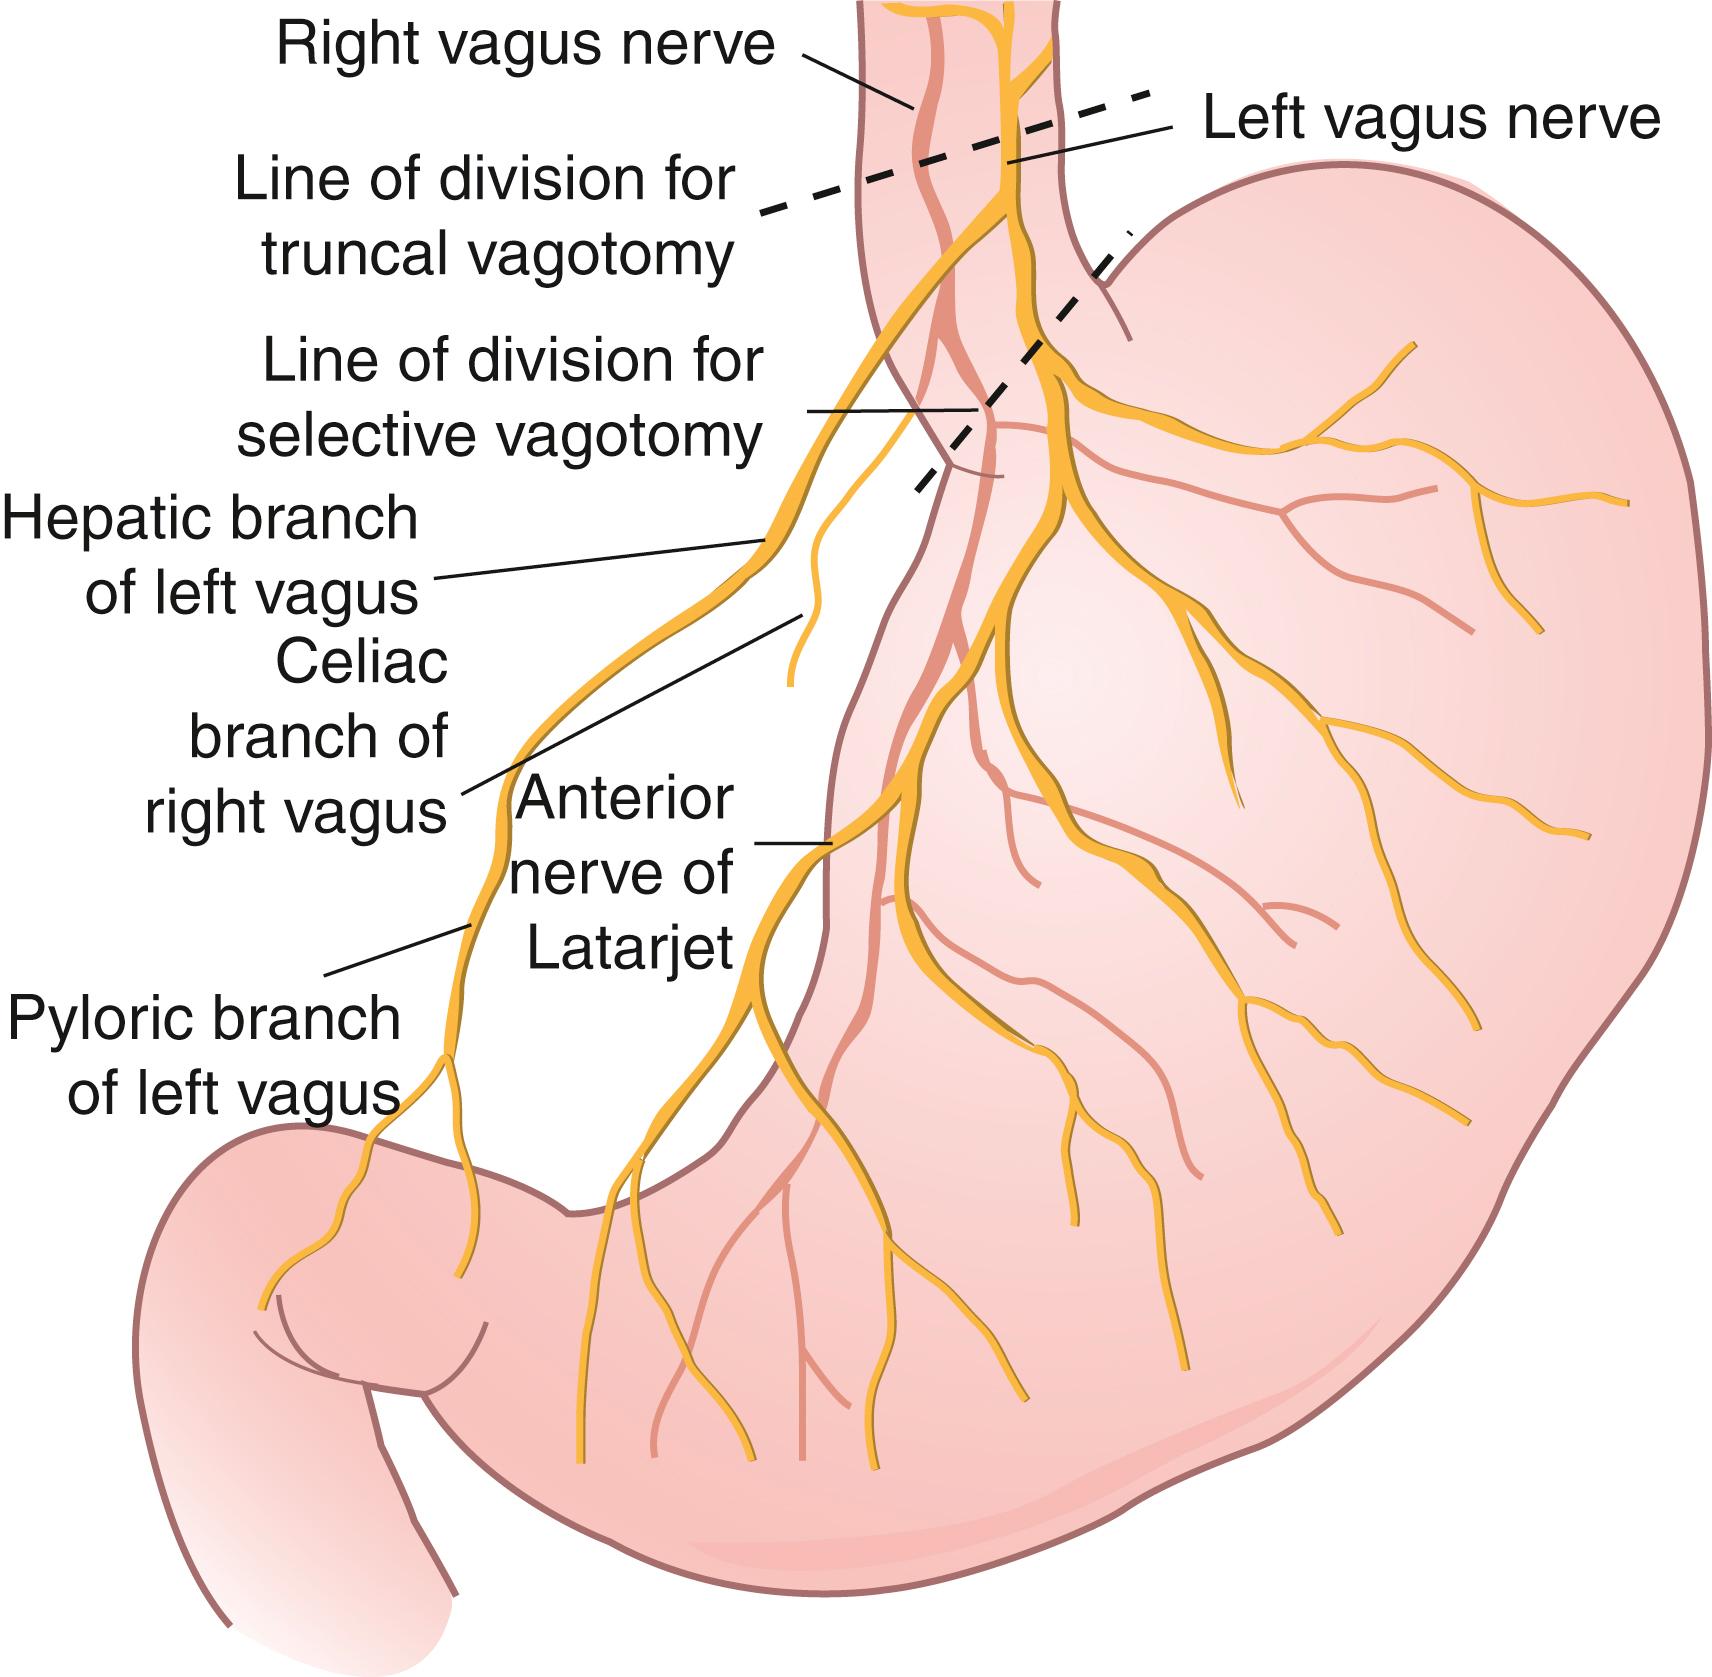 Fig. 49.4, Vagal innervation of the stomach. The line of division for truncal vagotomy is shown; it is above the hepatic and celiac branches of the left and right vagus nerves, respectively. The line of division for selective vagotomy is shown; this is below the hepatic and celiac branches.